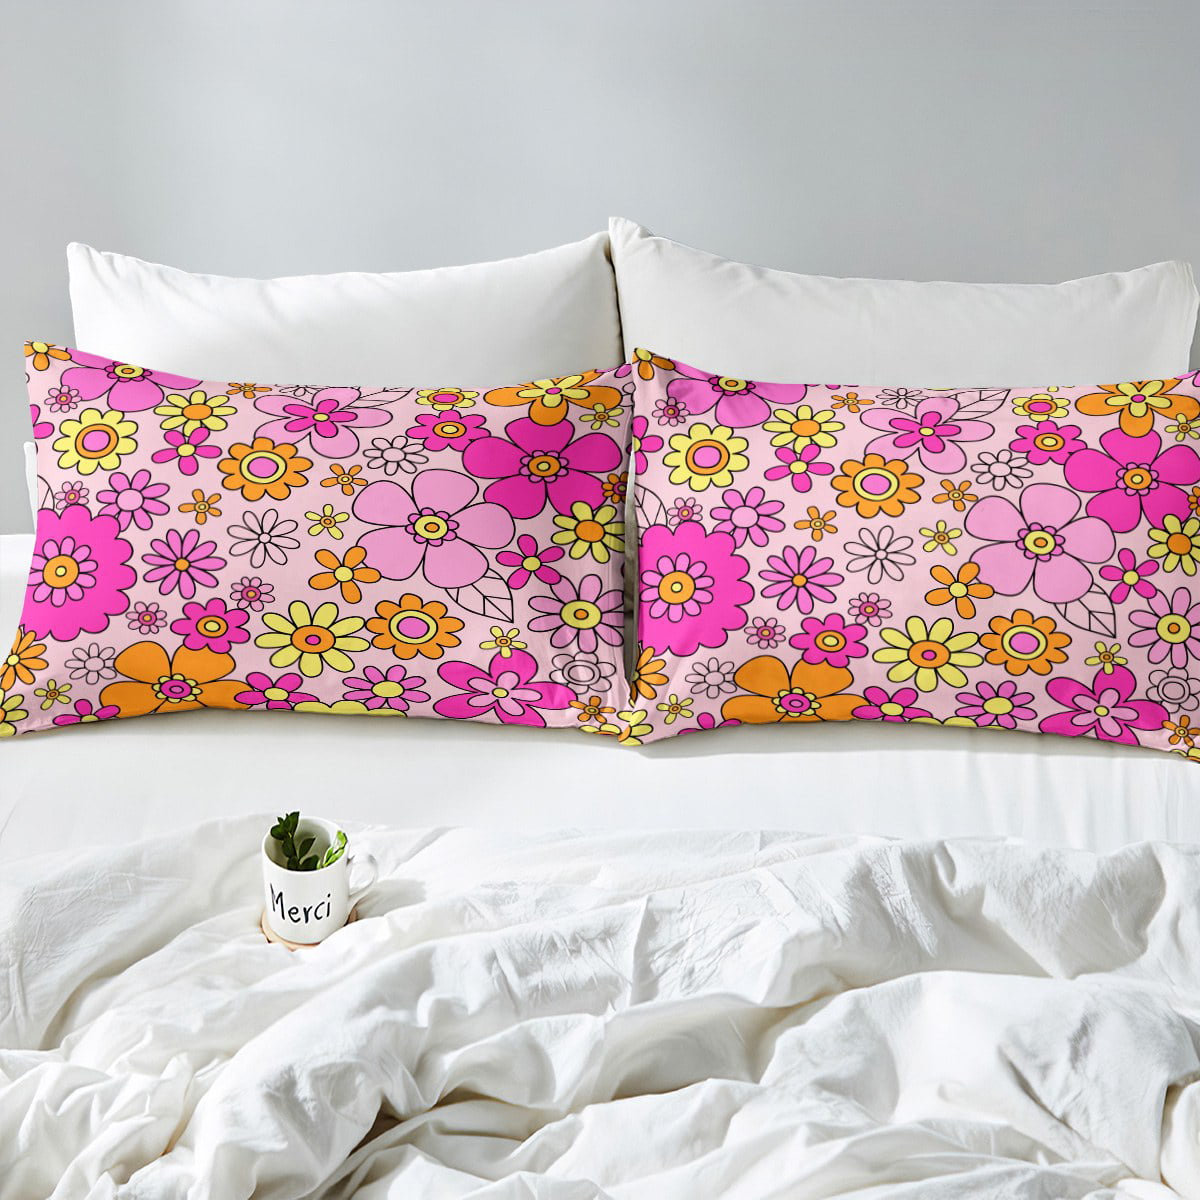 Stupell Vintage Dried Pink Flowers Flattened Florals, 3pc Multi Piece Wood  Wall Art Set,12 x 12 - Yellow - Bed Bath & Beyond - 32549545